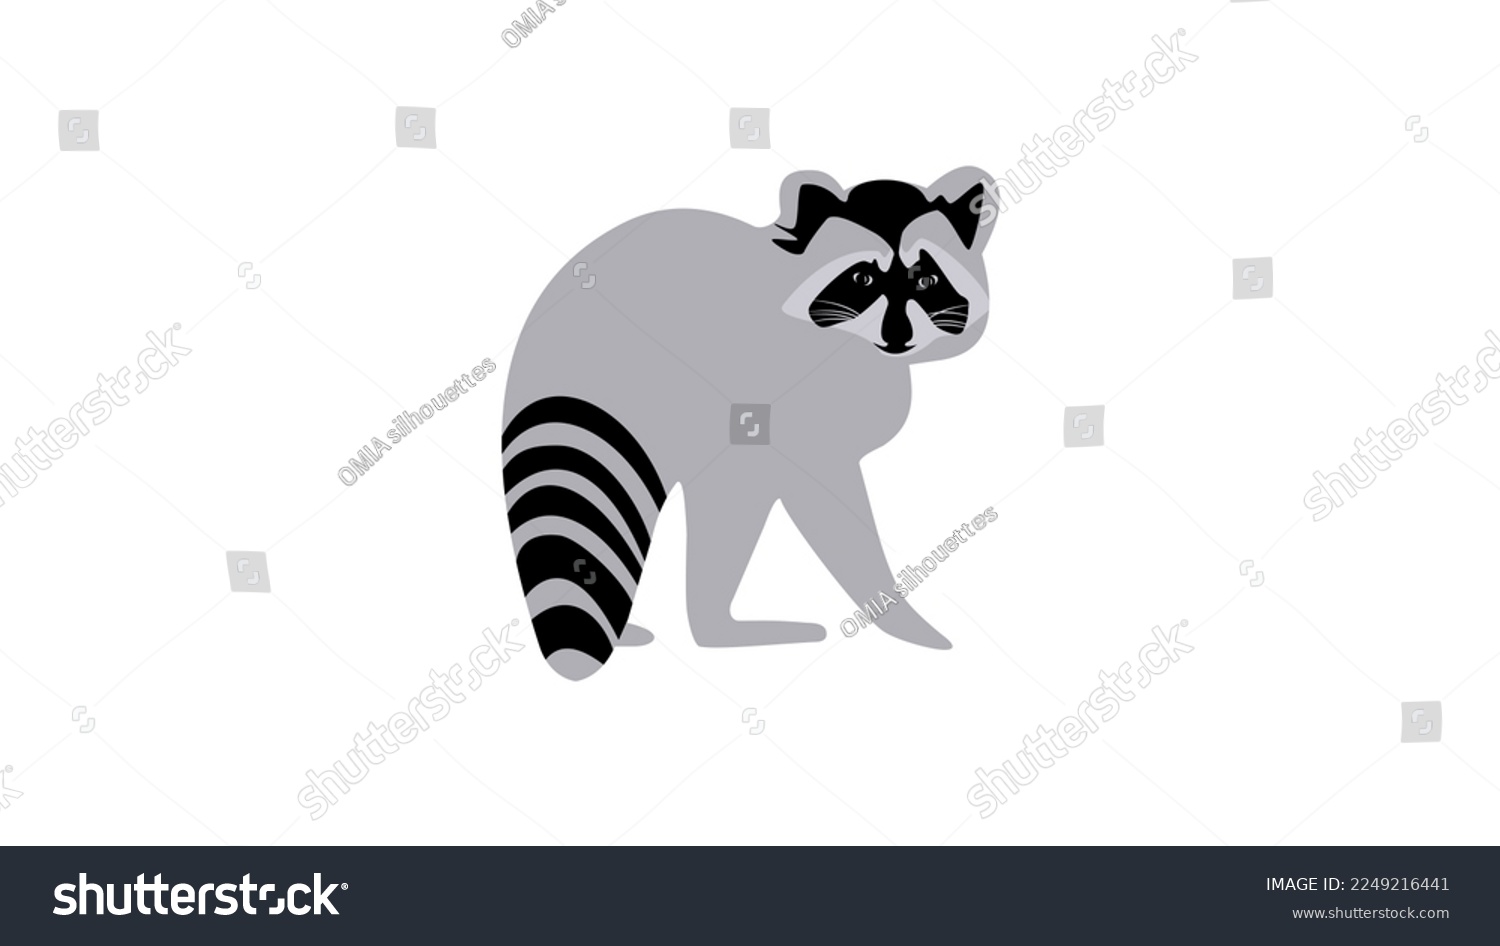 SVG of Raccoon silhouette, high quality vector svg